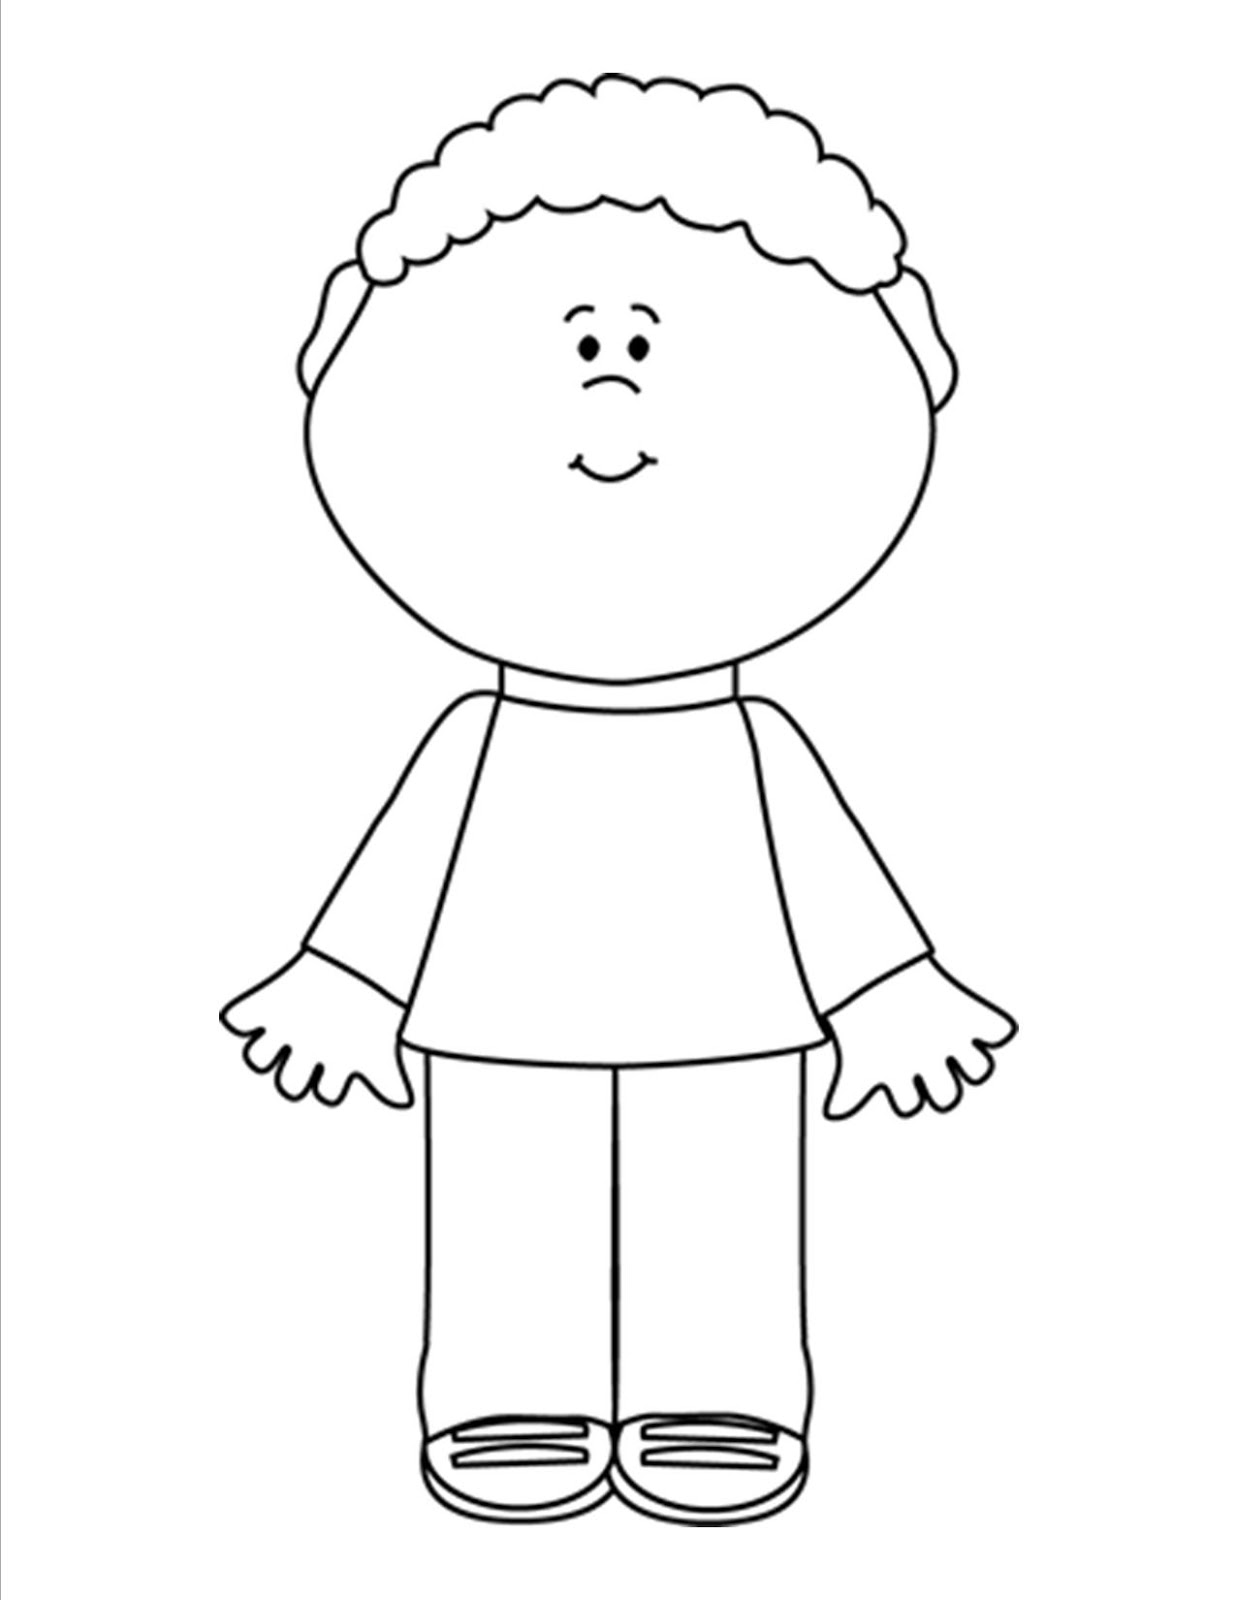 Free Little Boy Clipart Black And White, Download Free Little Boy ...